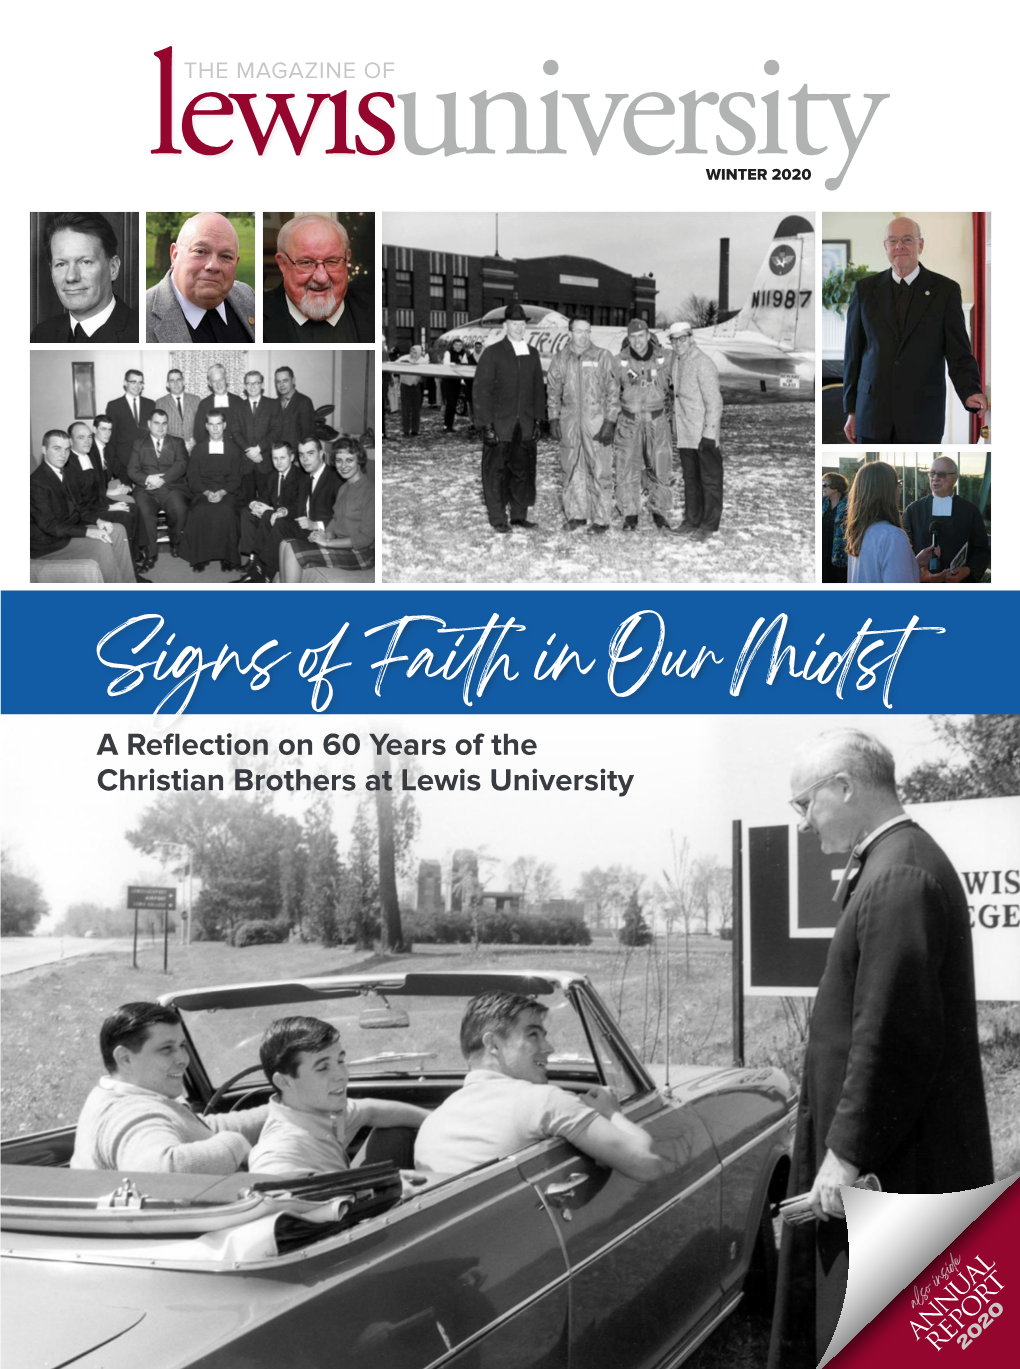 Signs of Faith in Our Midst a Reflection on 60 Years of the Christian Brothers at Lewis University